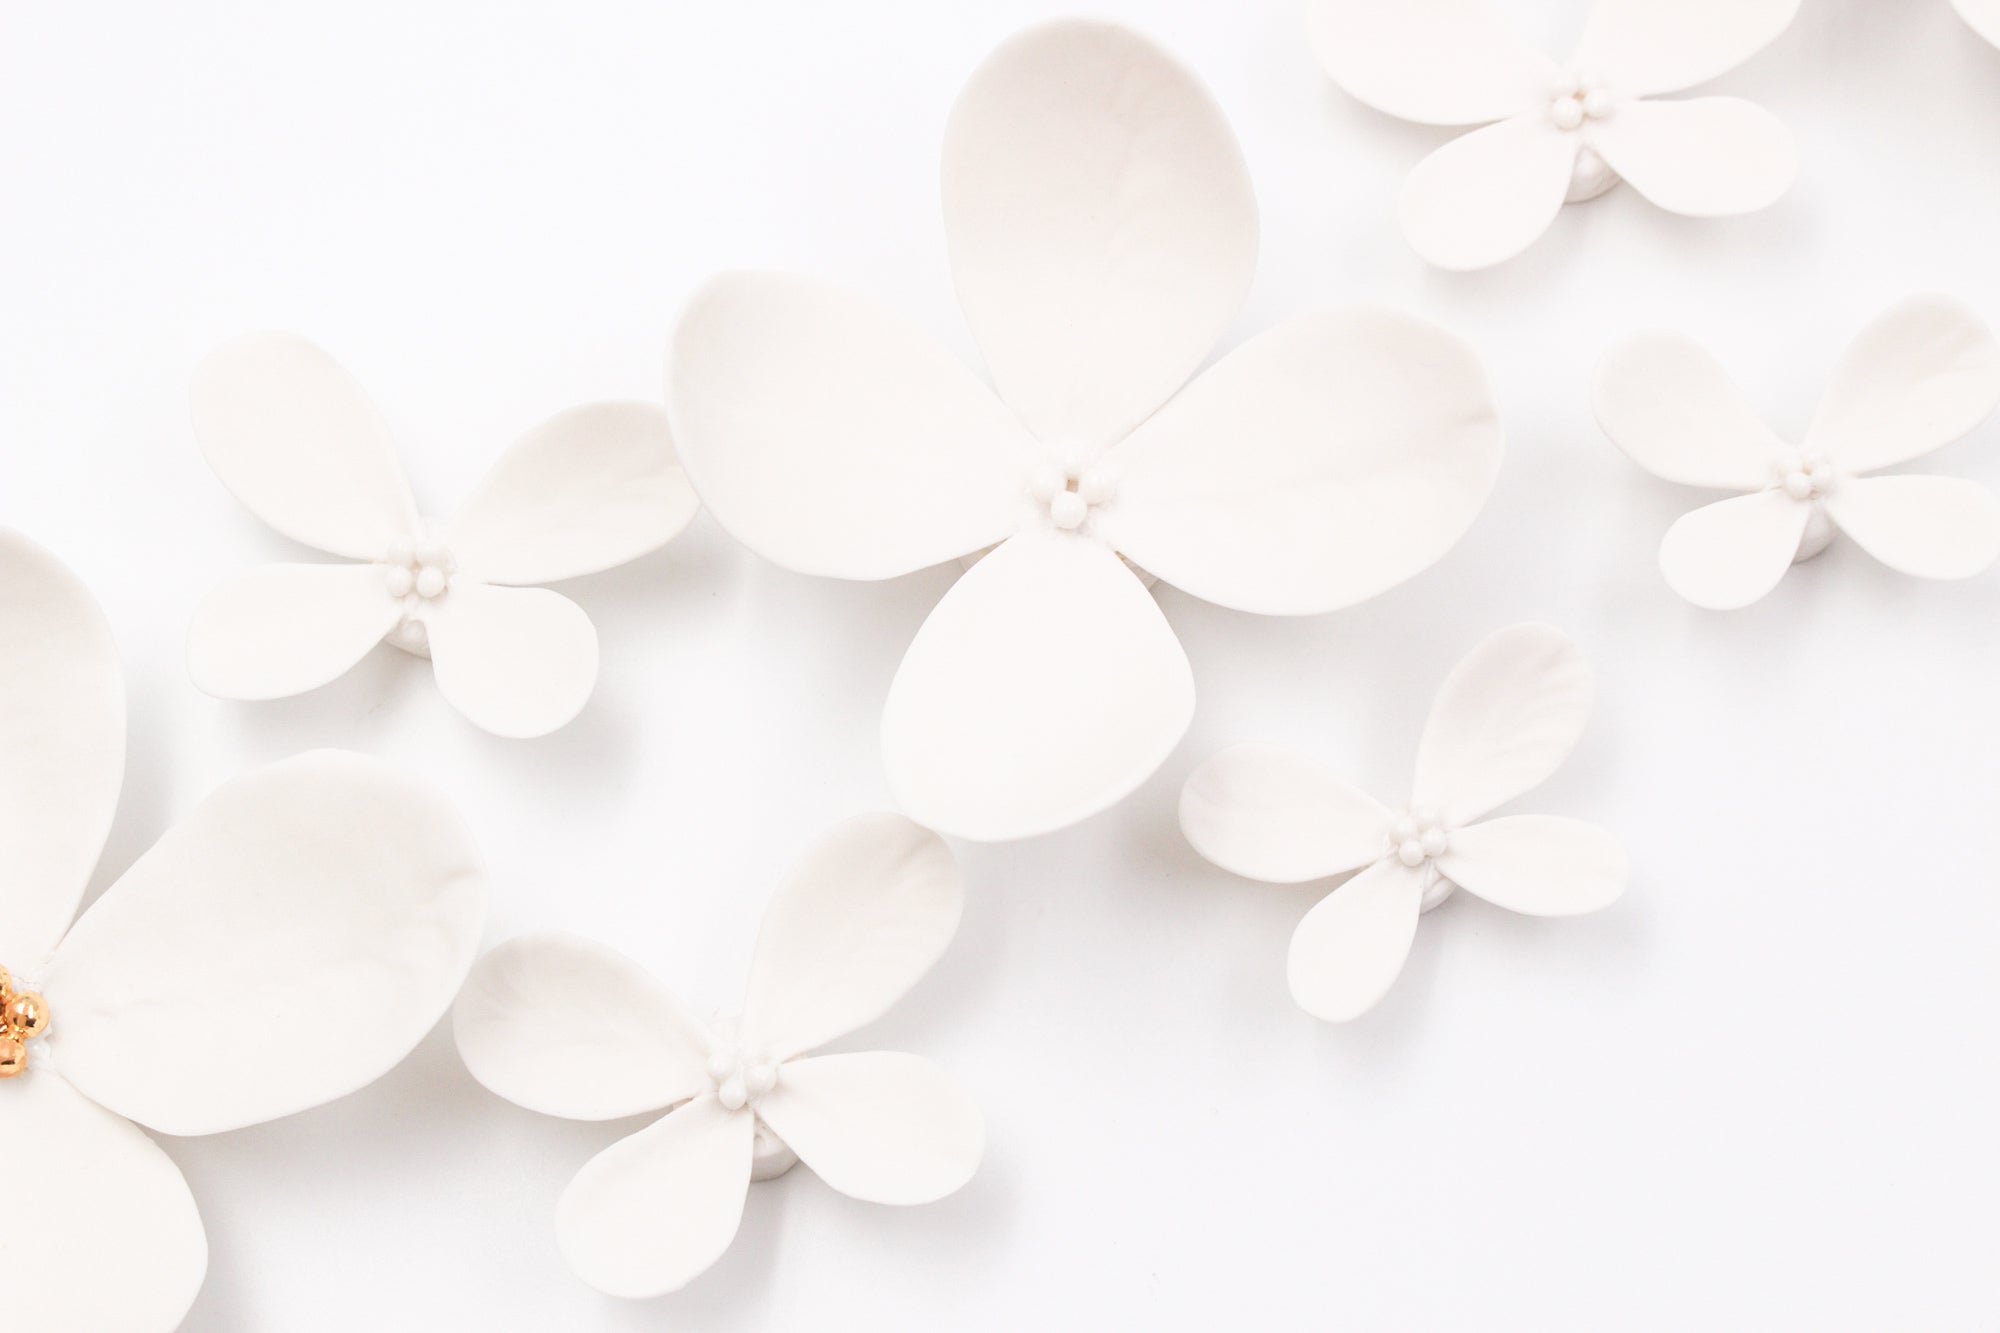 Wall Decor of Porcelain Hydrangeas - Handmade Porcelain Flowers for Interior and Event Decoration - Made in France by Alain Granell – Home and Wall Decoration